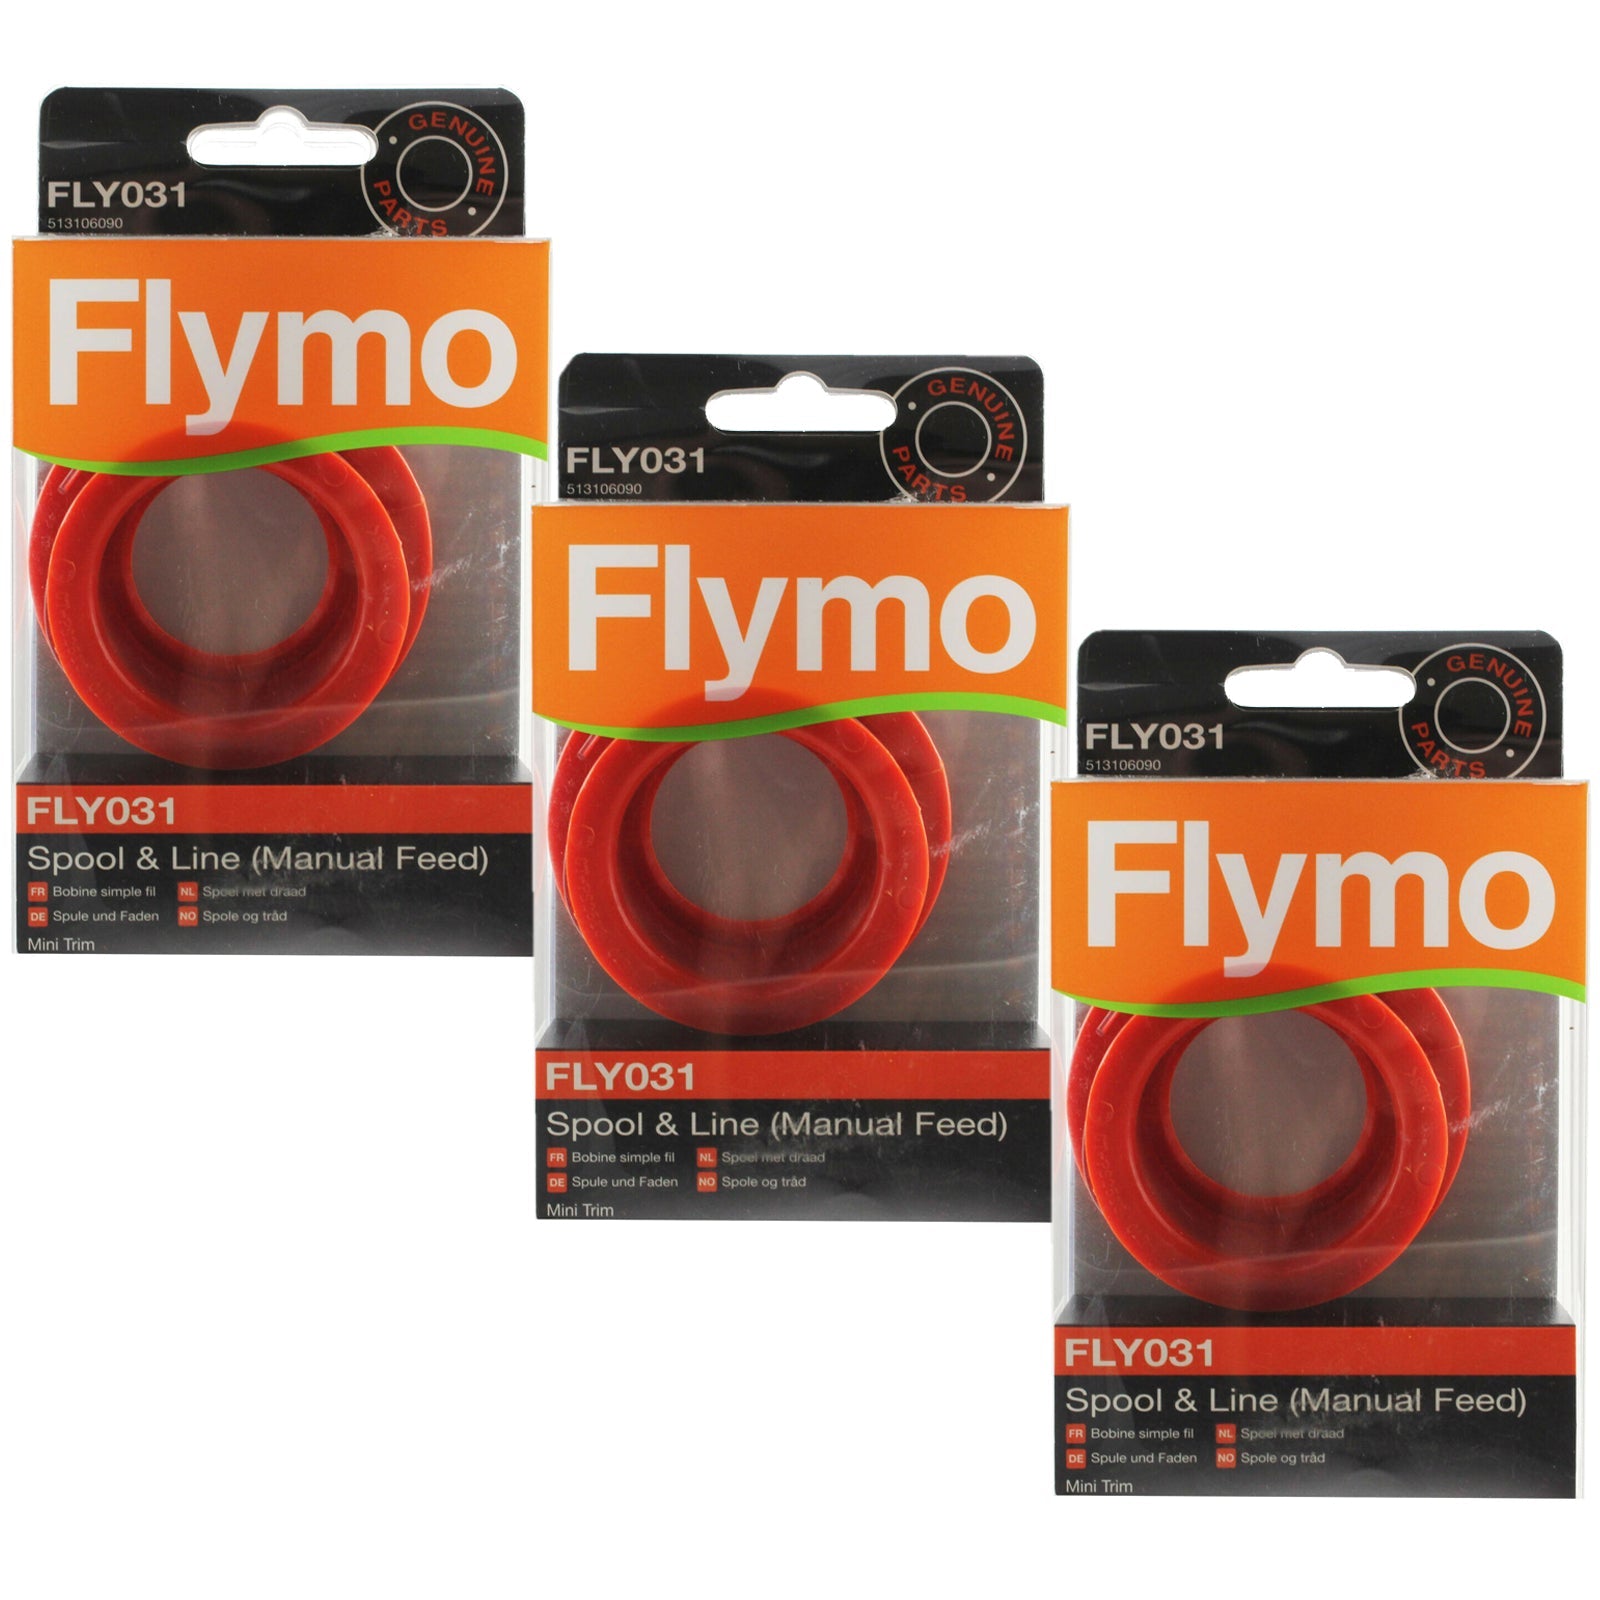 Flymo Strimmer Trimmer Mini Trim ET21 MT21 Spool and Line FLY031 x 3